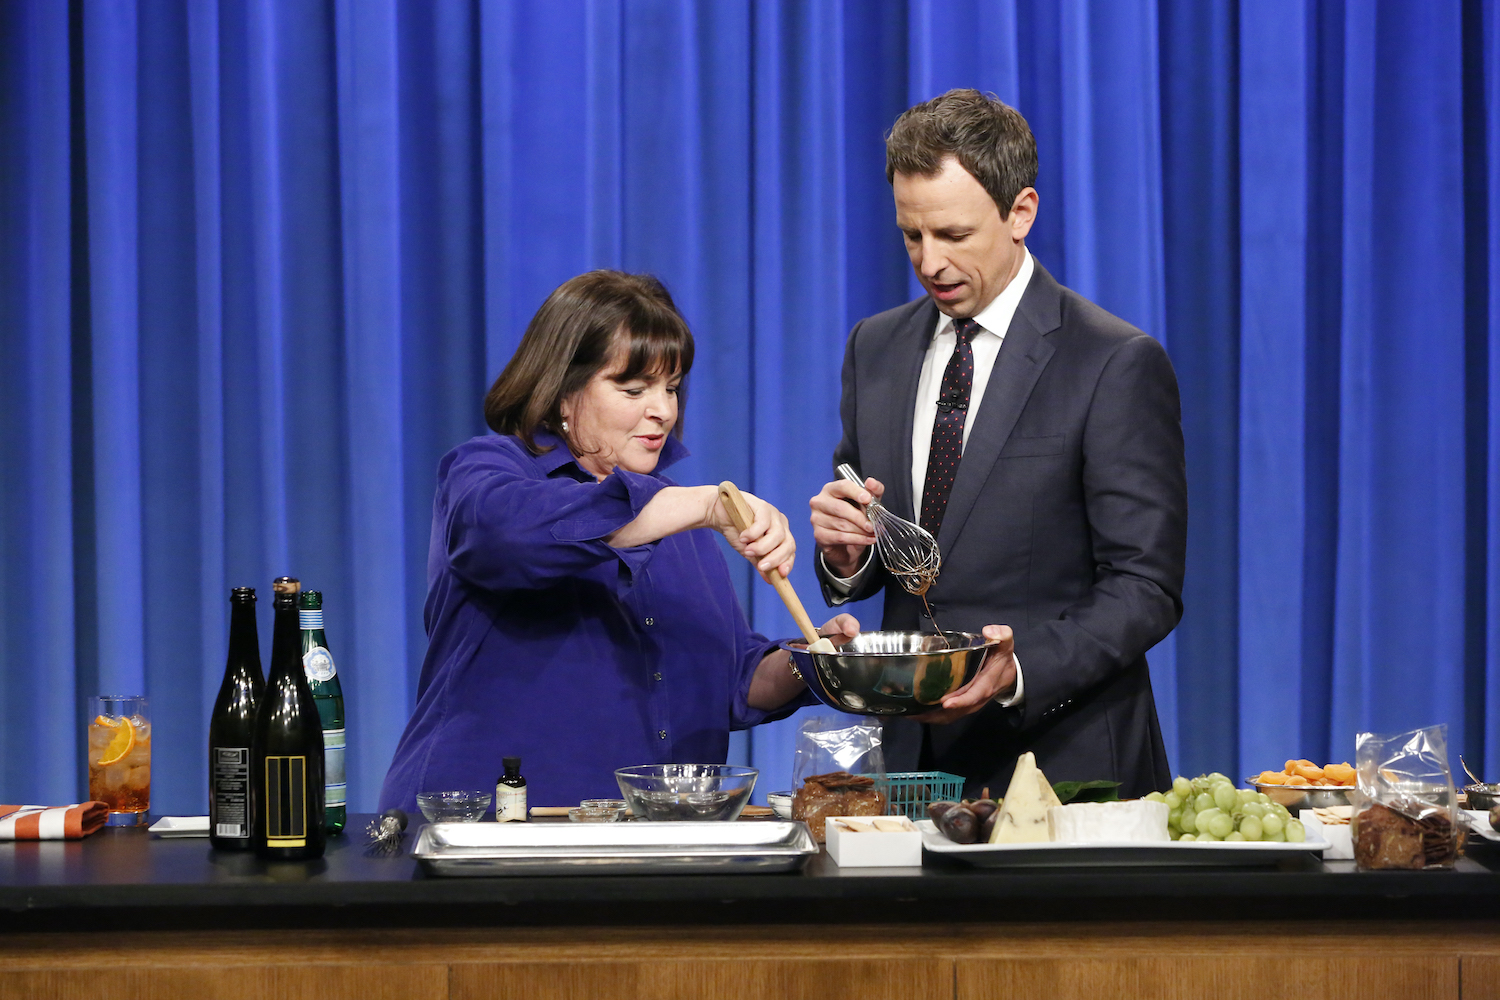 Ina Garten during a cooking segment on Late Night with Seth Meyers